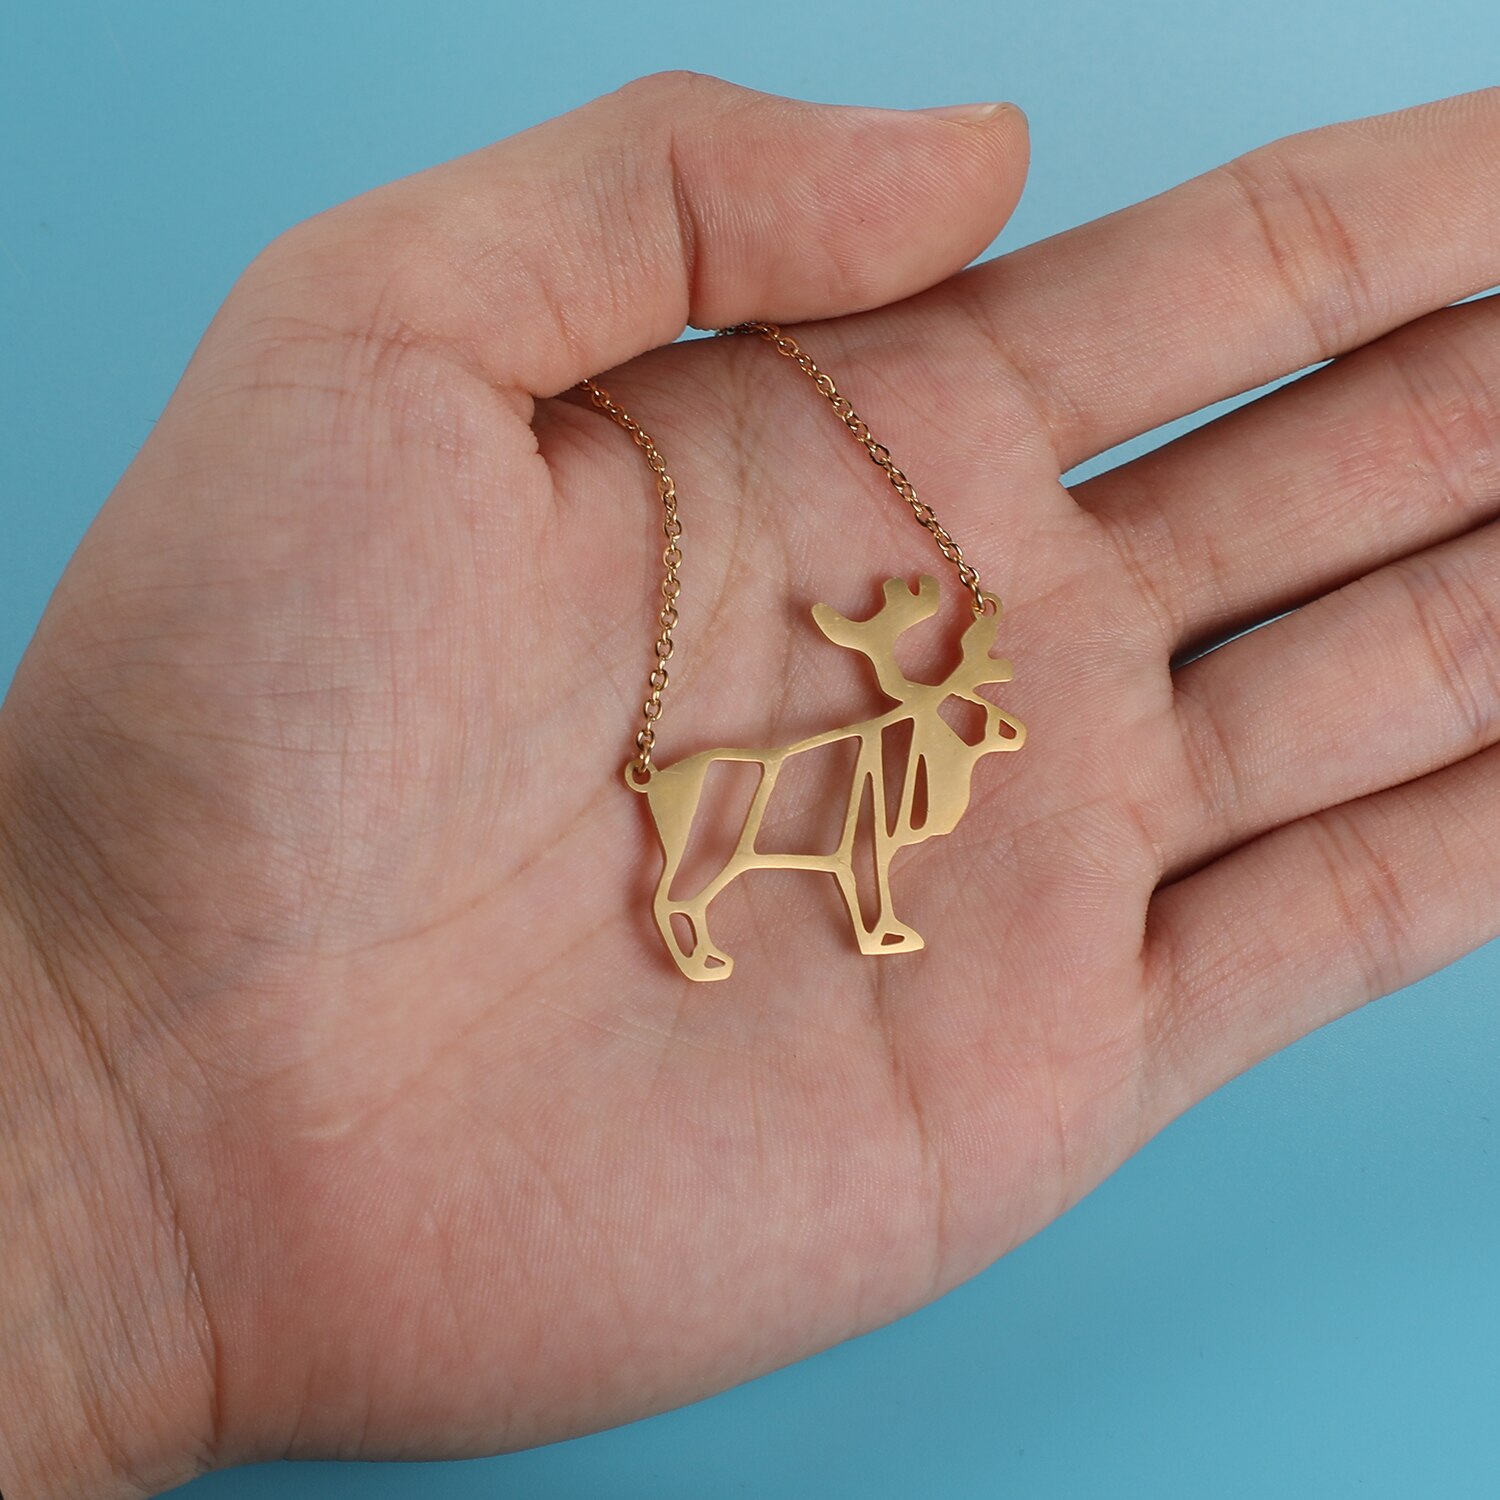 Stately Elk Origami Necklace on hand